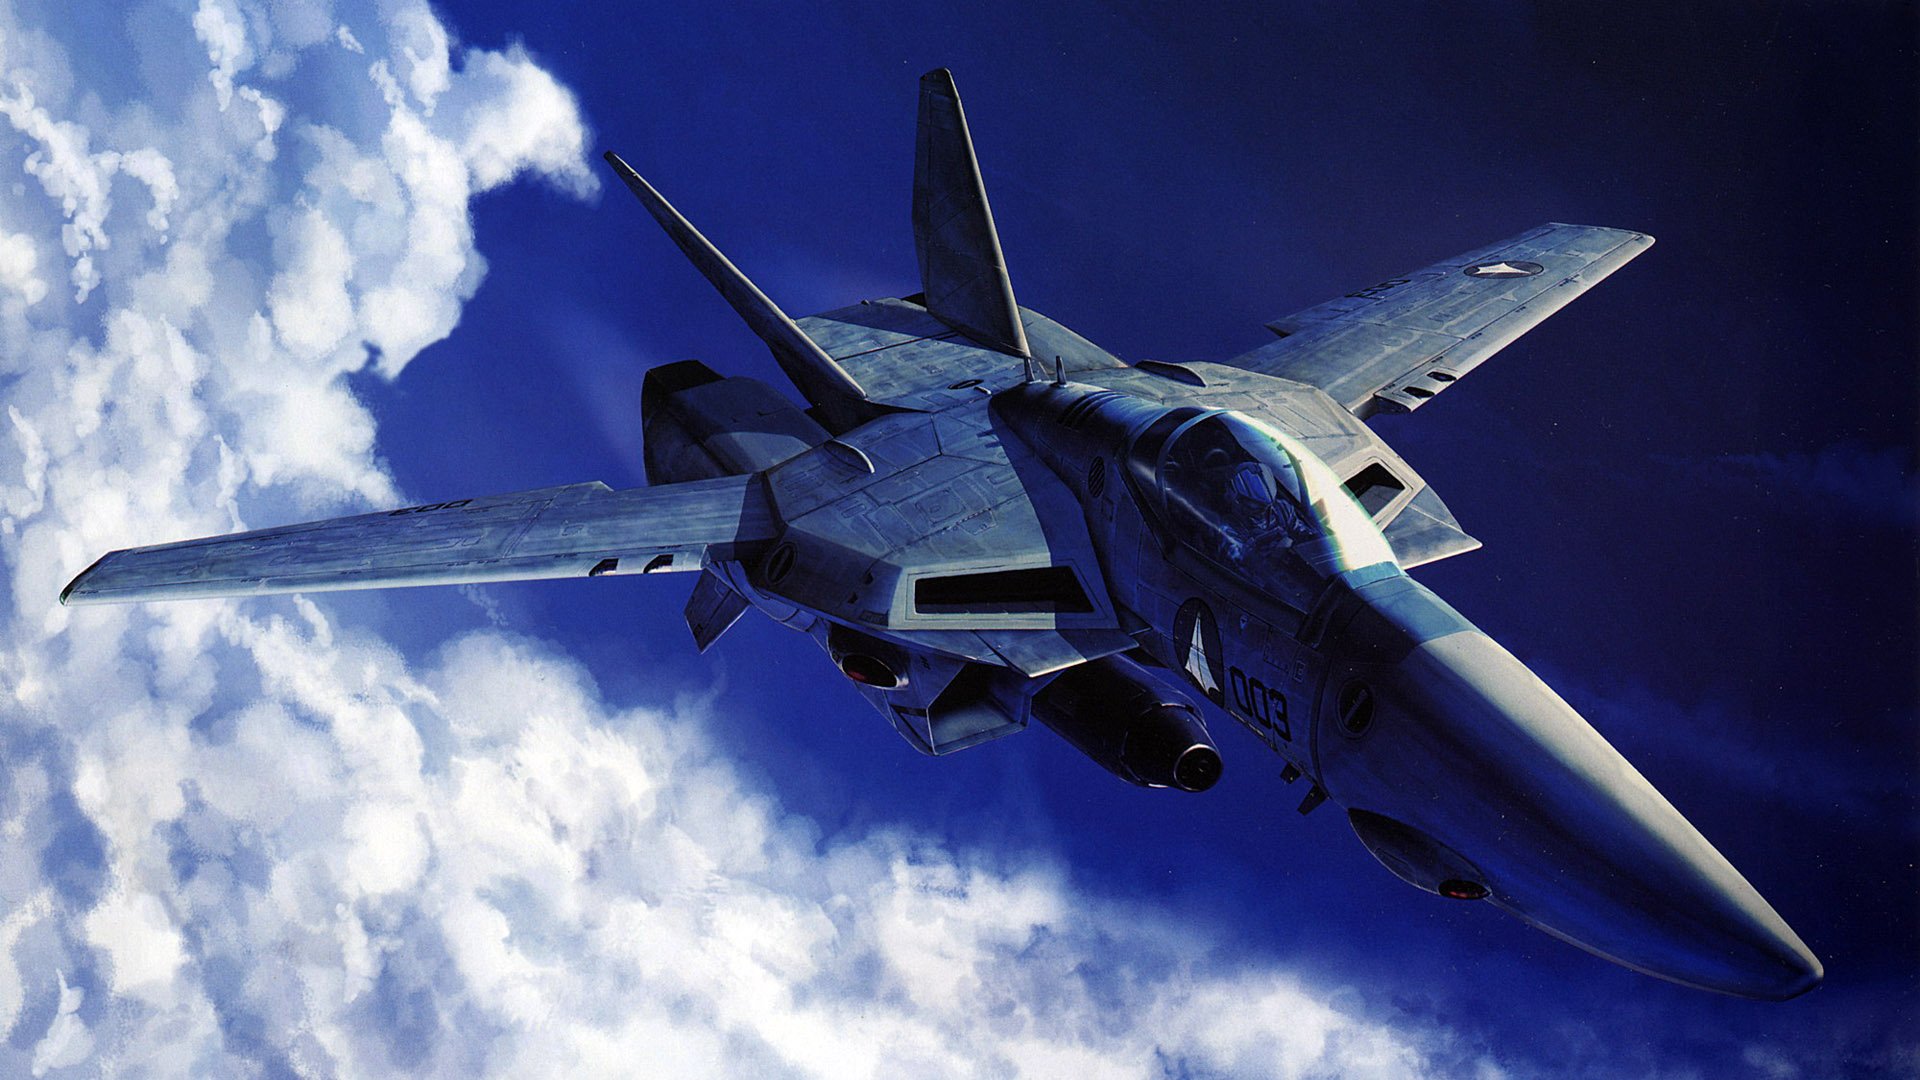 check out the latest Fighter Jets Hd Wallpapers and high definition 1920x1080